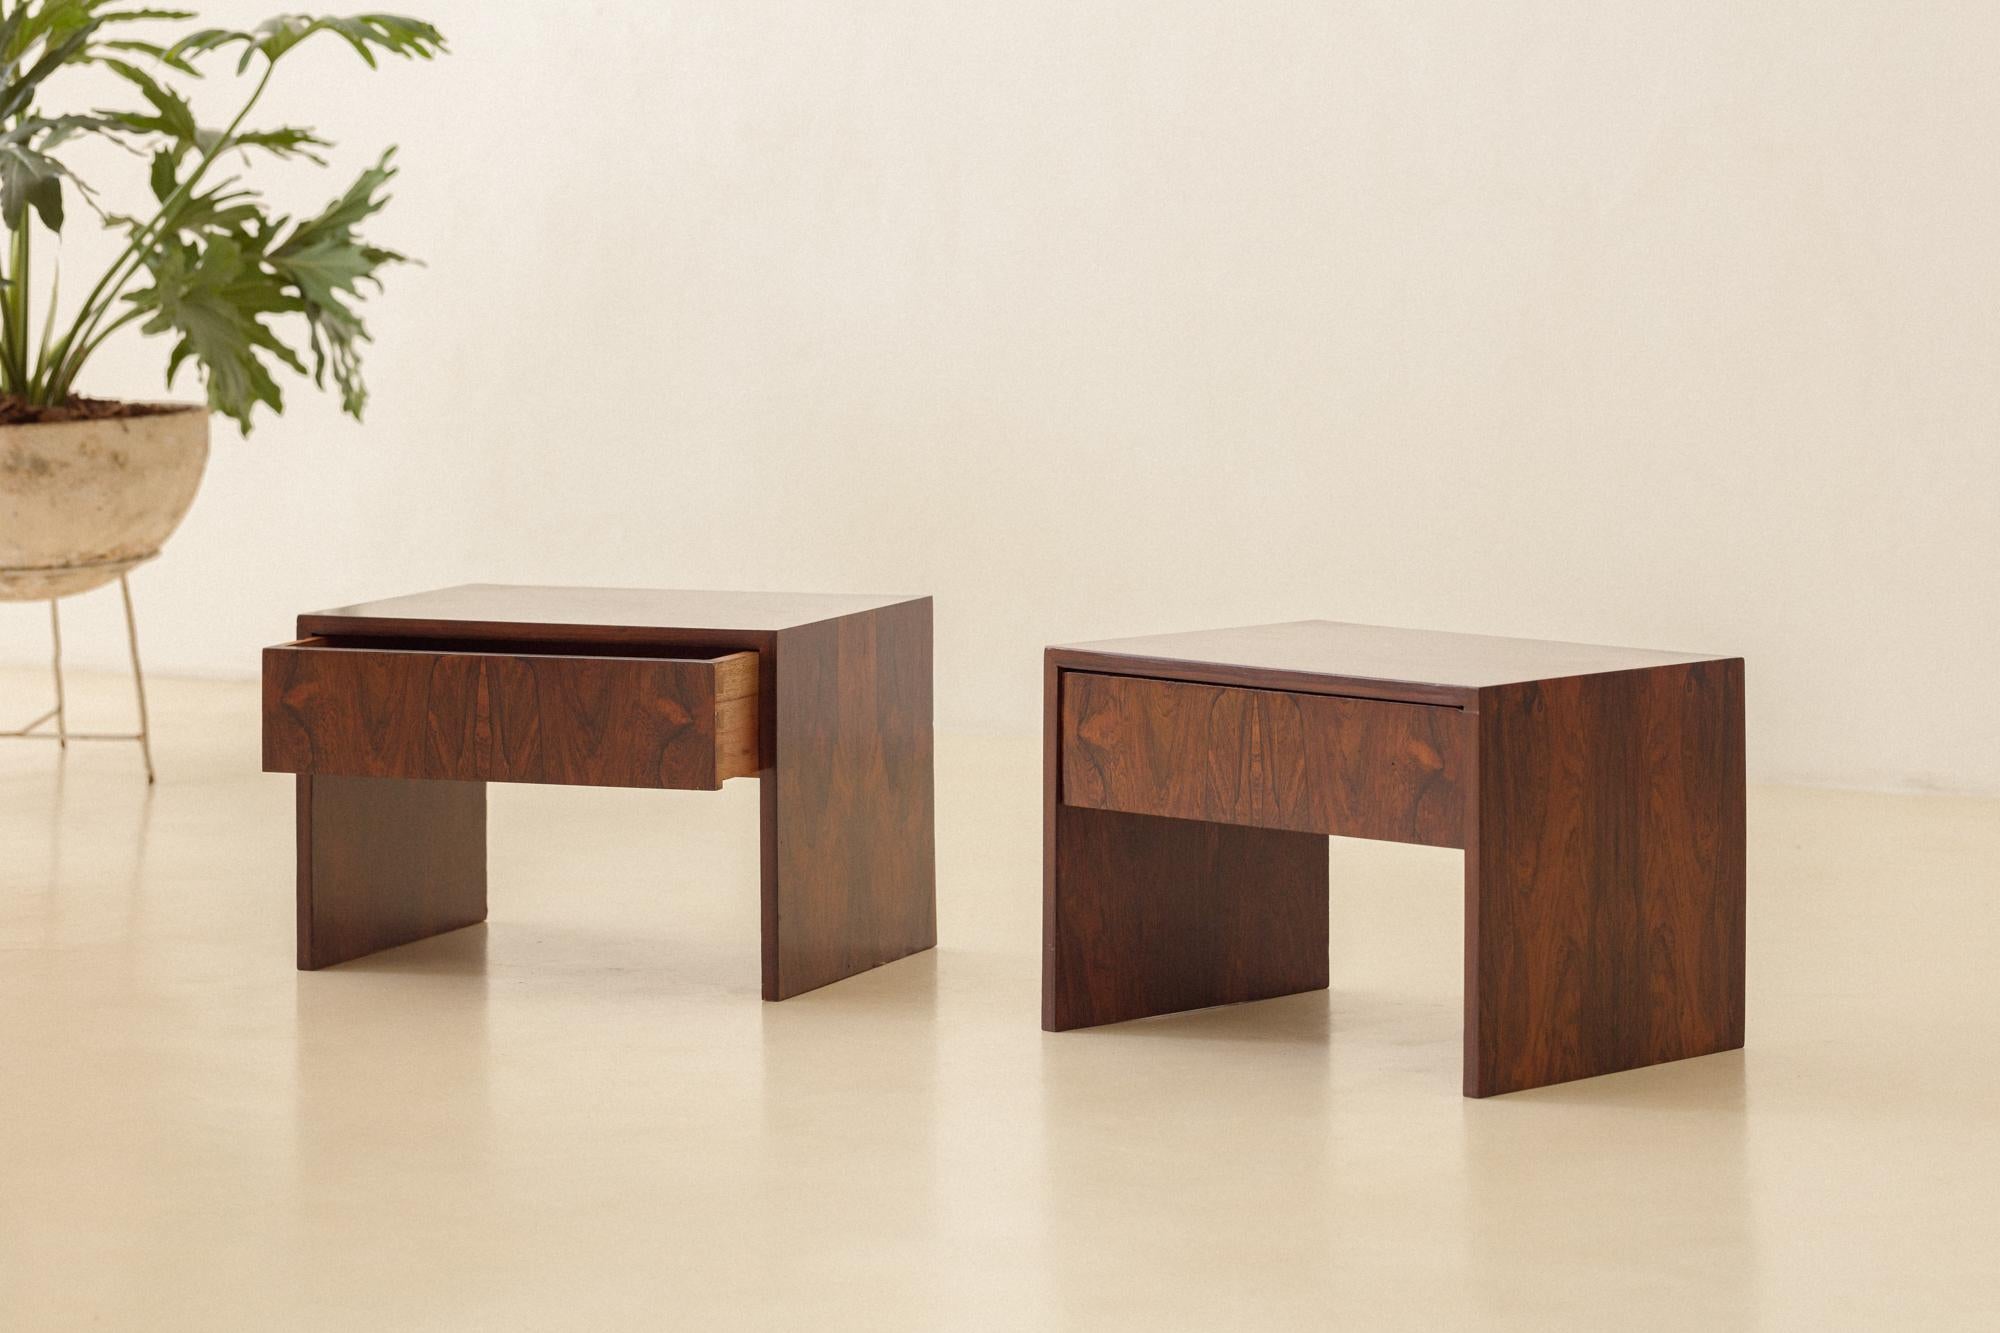 Pair of Rosewood Nightstands by Unknown Designer, 1960s, Brazilian Midcentury For Sale 4